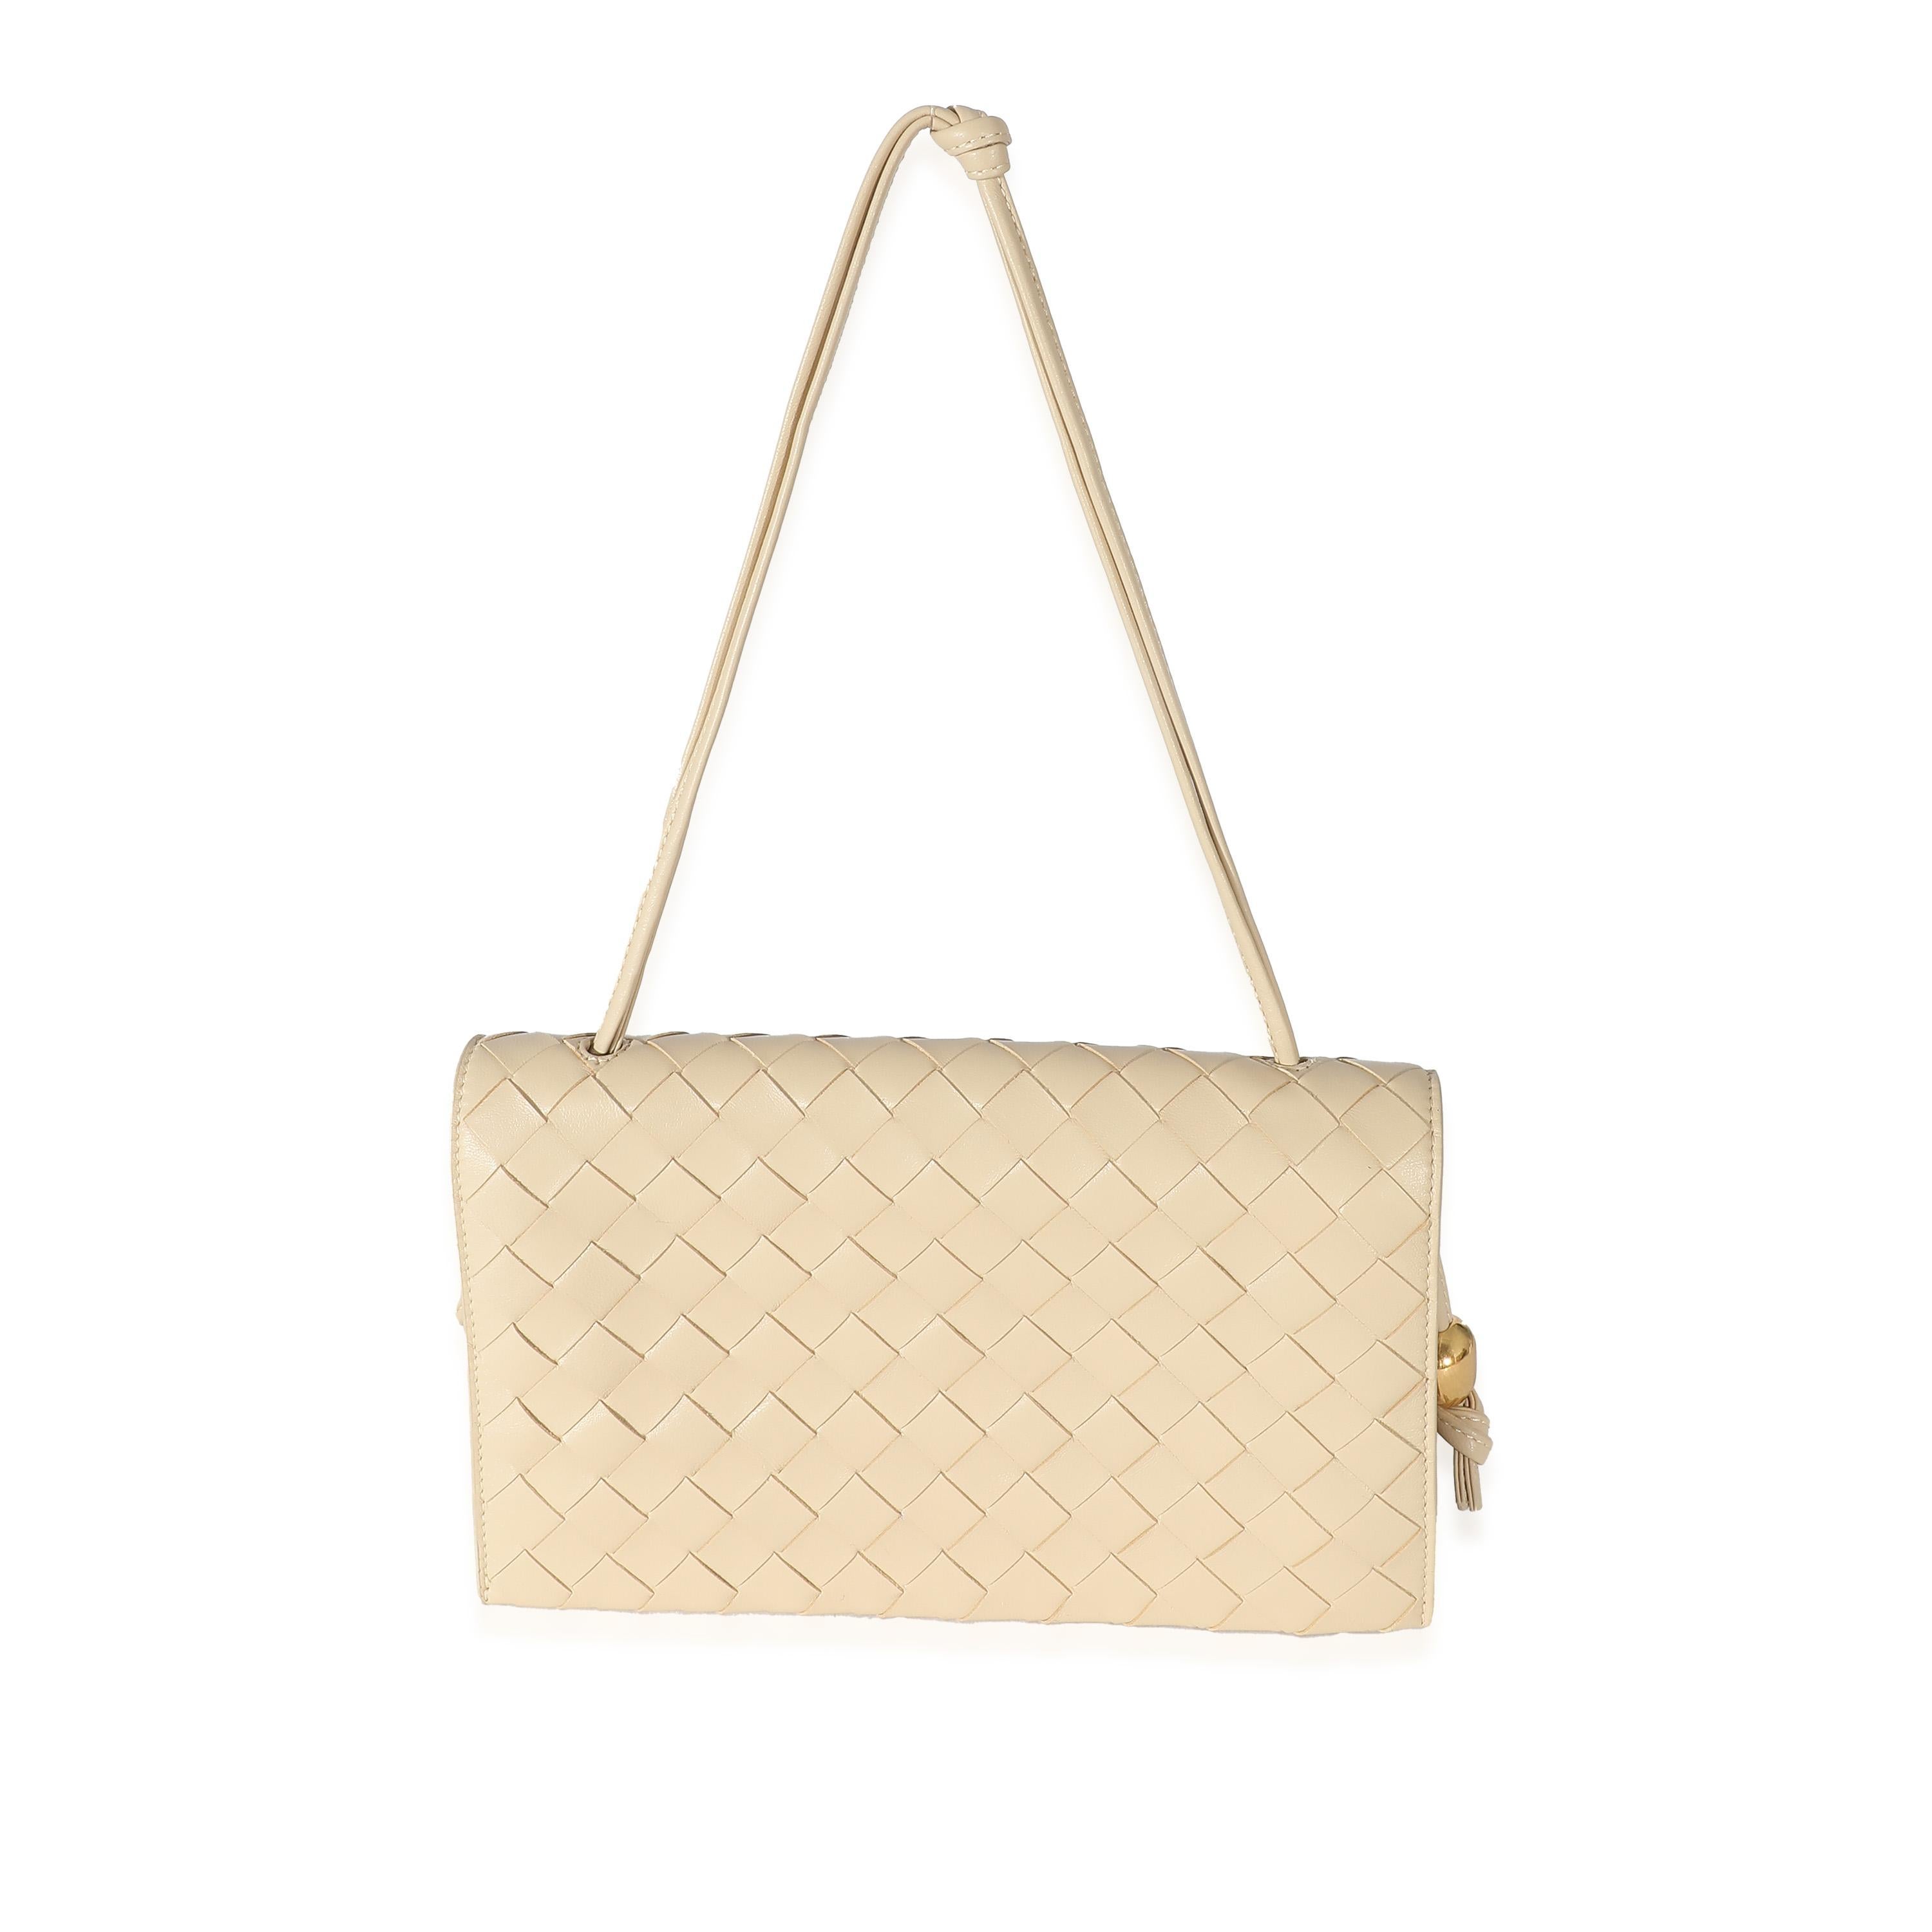 Listing Title: Bottega Veneta Porridge Intrecciato Lambskin Trio Pouch
SKU: 133084
MSRP: 2800.00 USD
Condition: Pre-owned 
Handbag Condition: Excellent
Condition Comments: Item is in excellent condition and displays light signs of wear. Plastic on